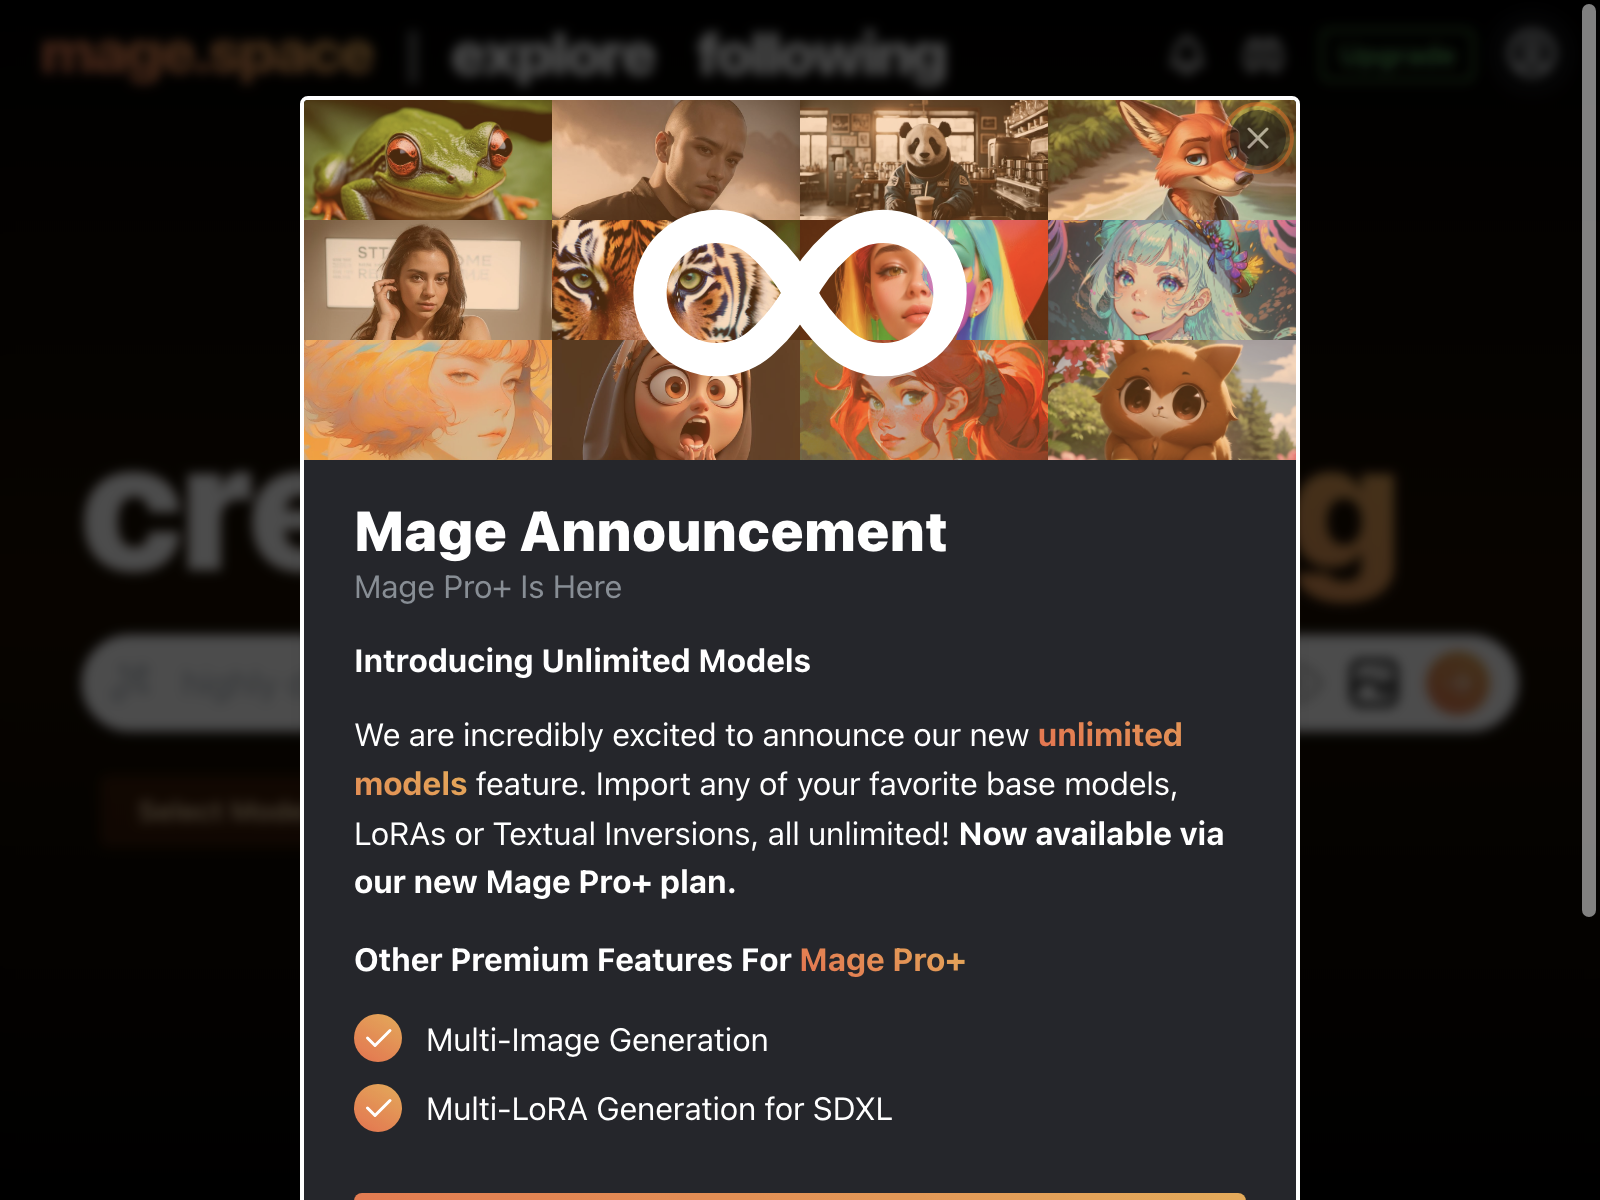 mage space Review: Pros, Cons, Alternatives